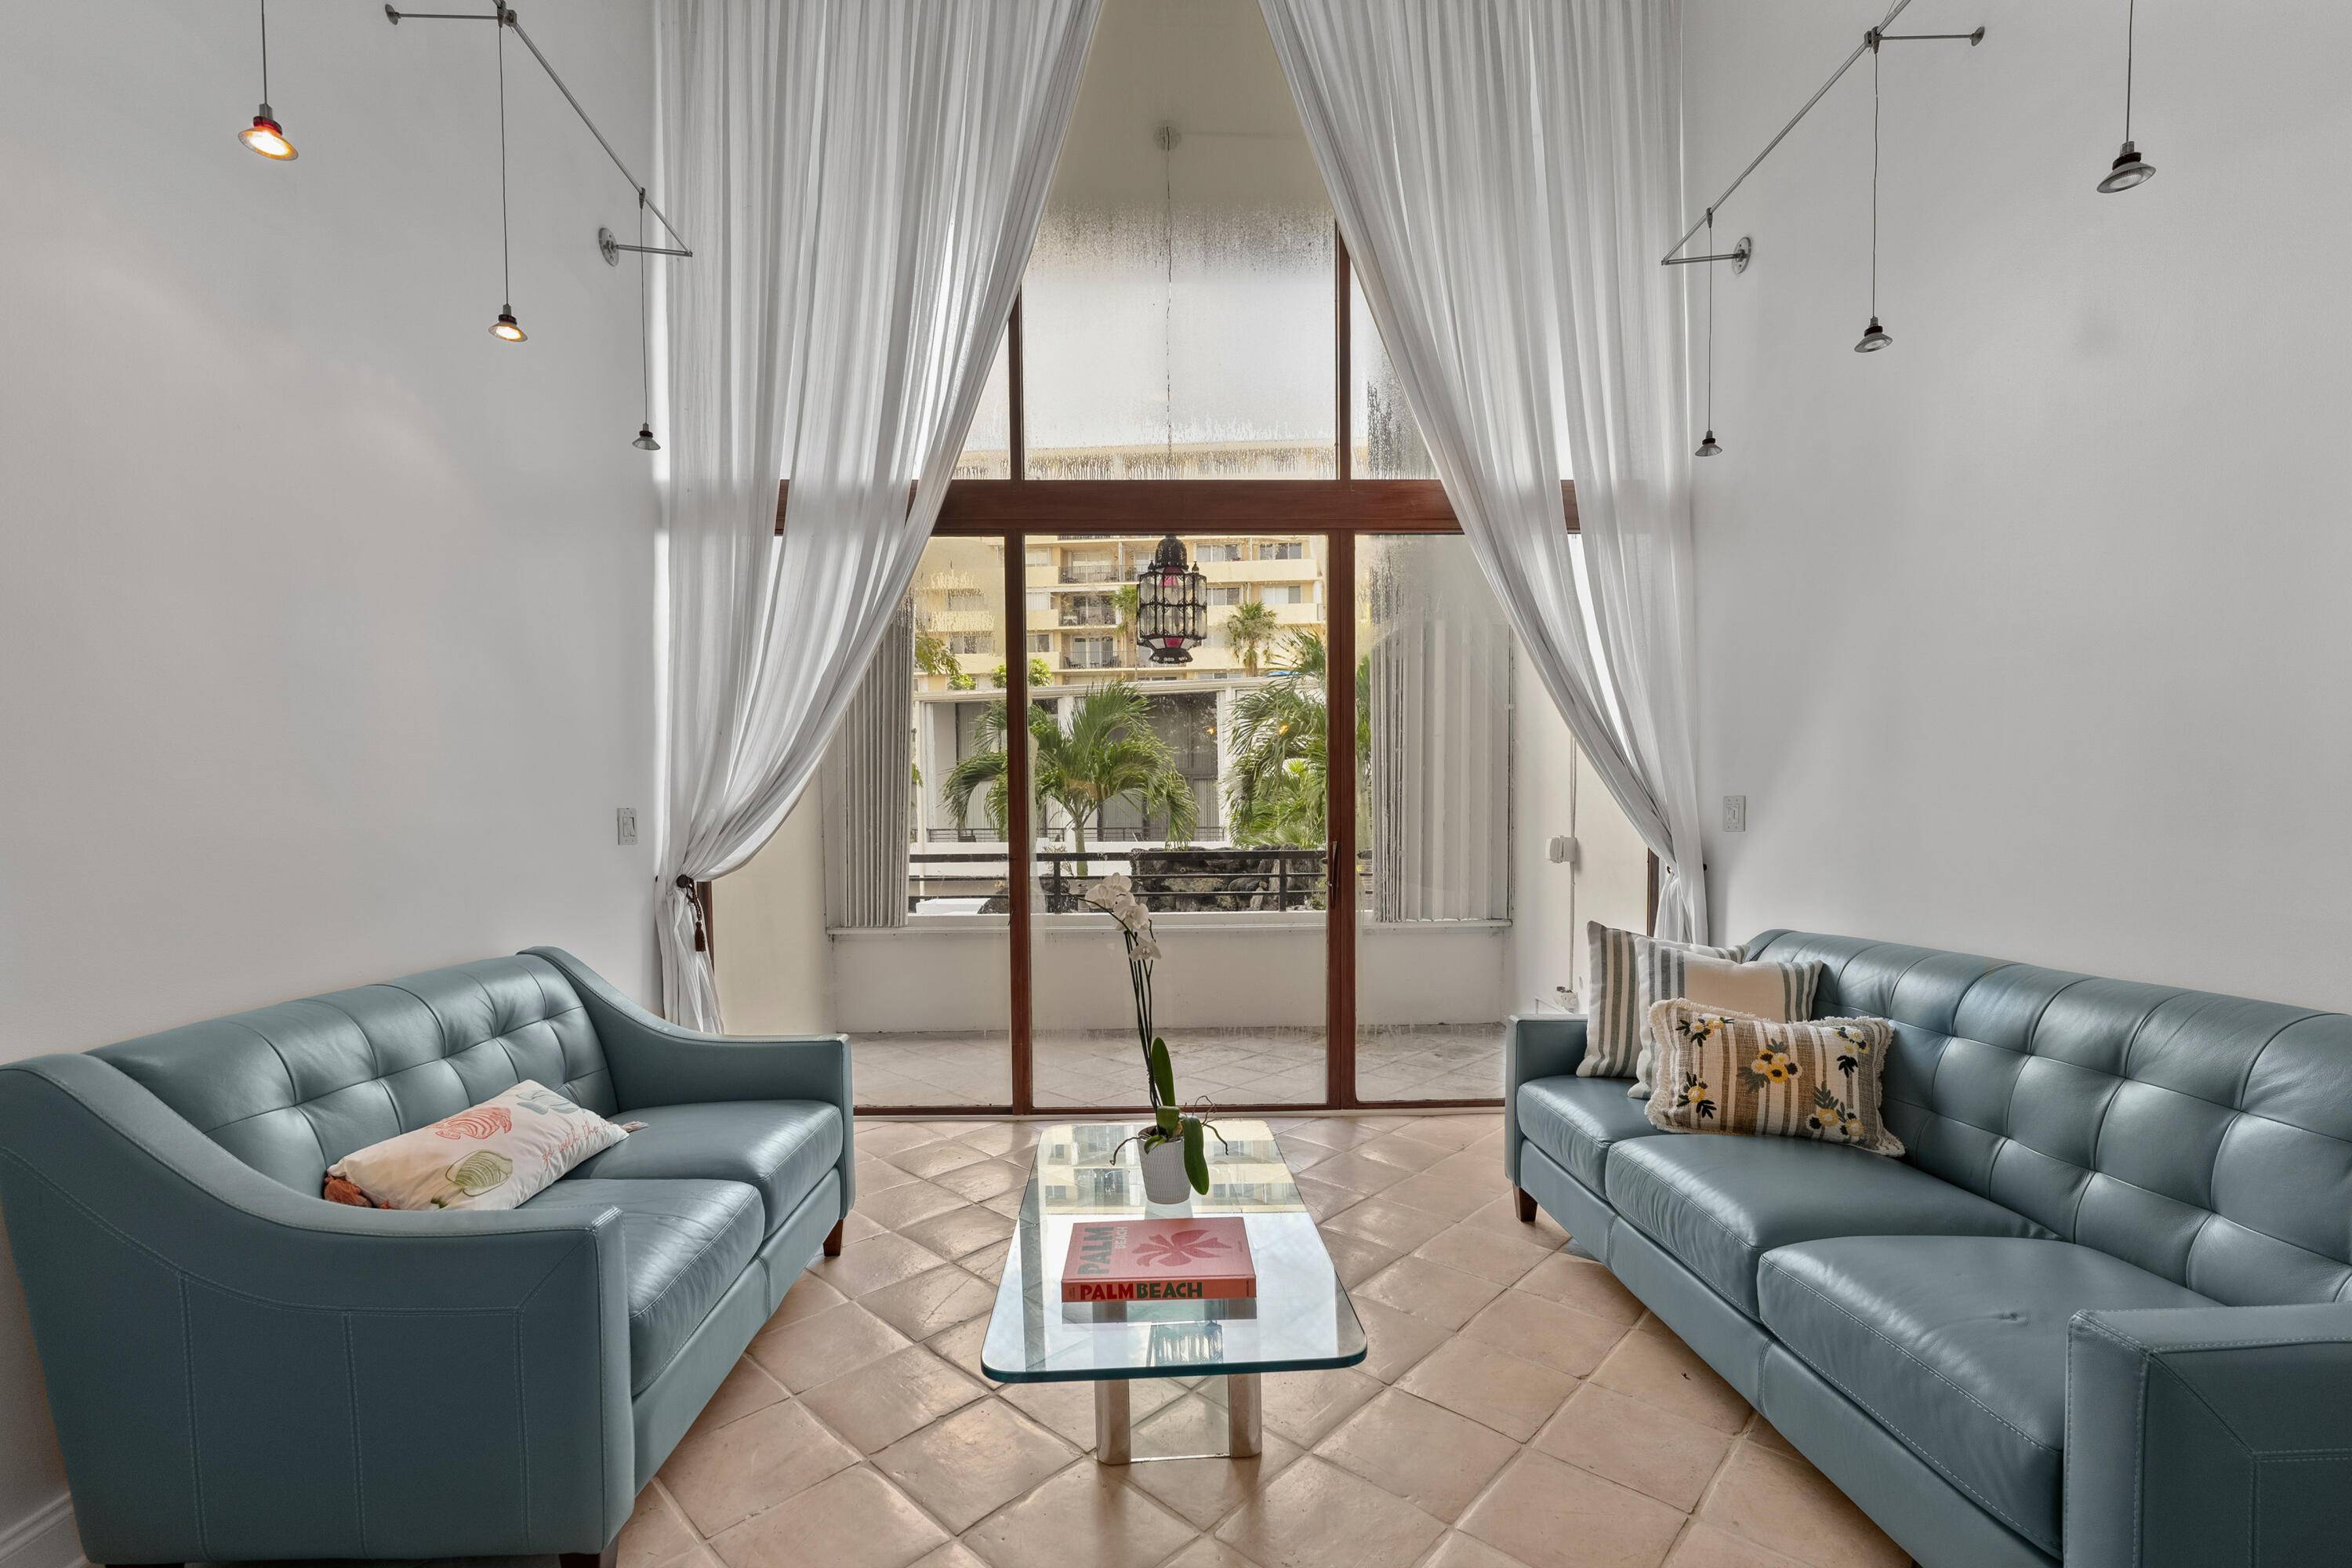 Welcome to this enchanting Spanish style loft, nestled in a serene lanai with romantic views overlooking a stunning Japanese garden.